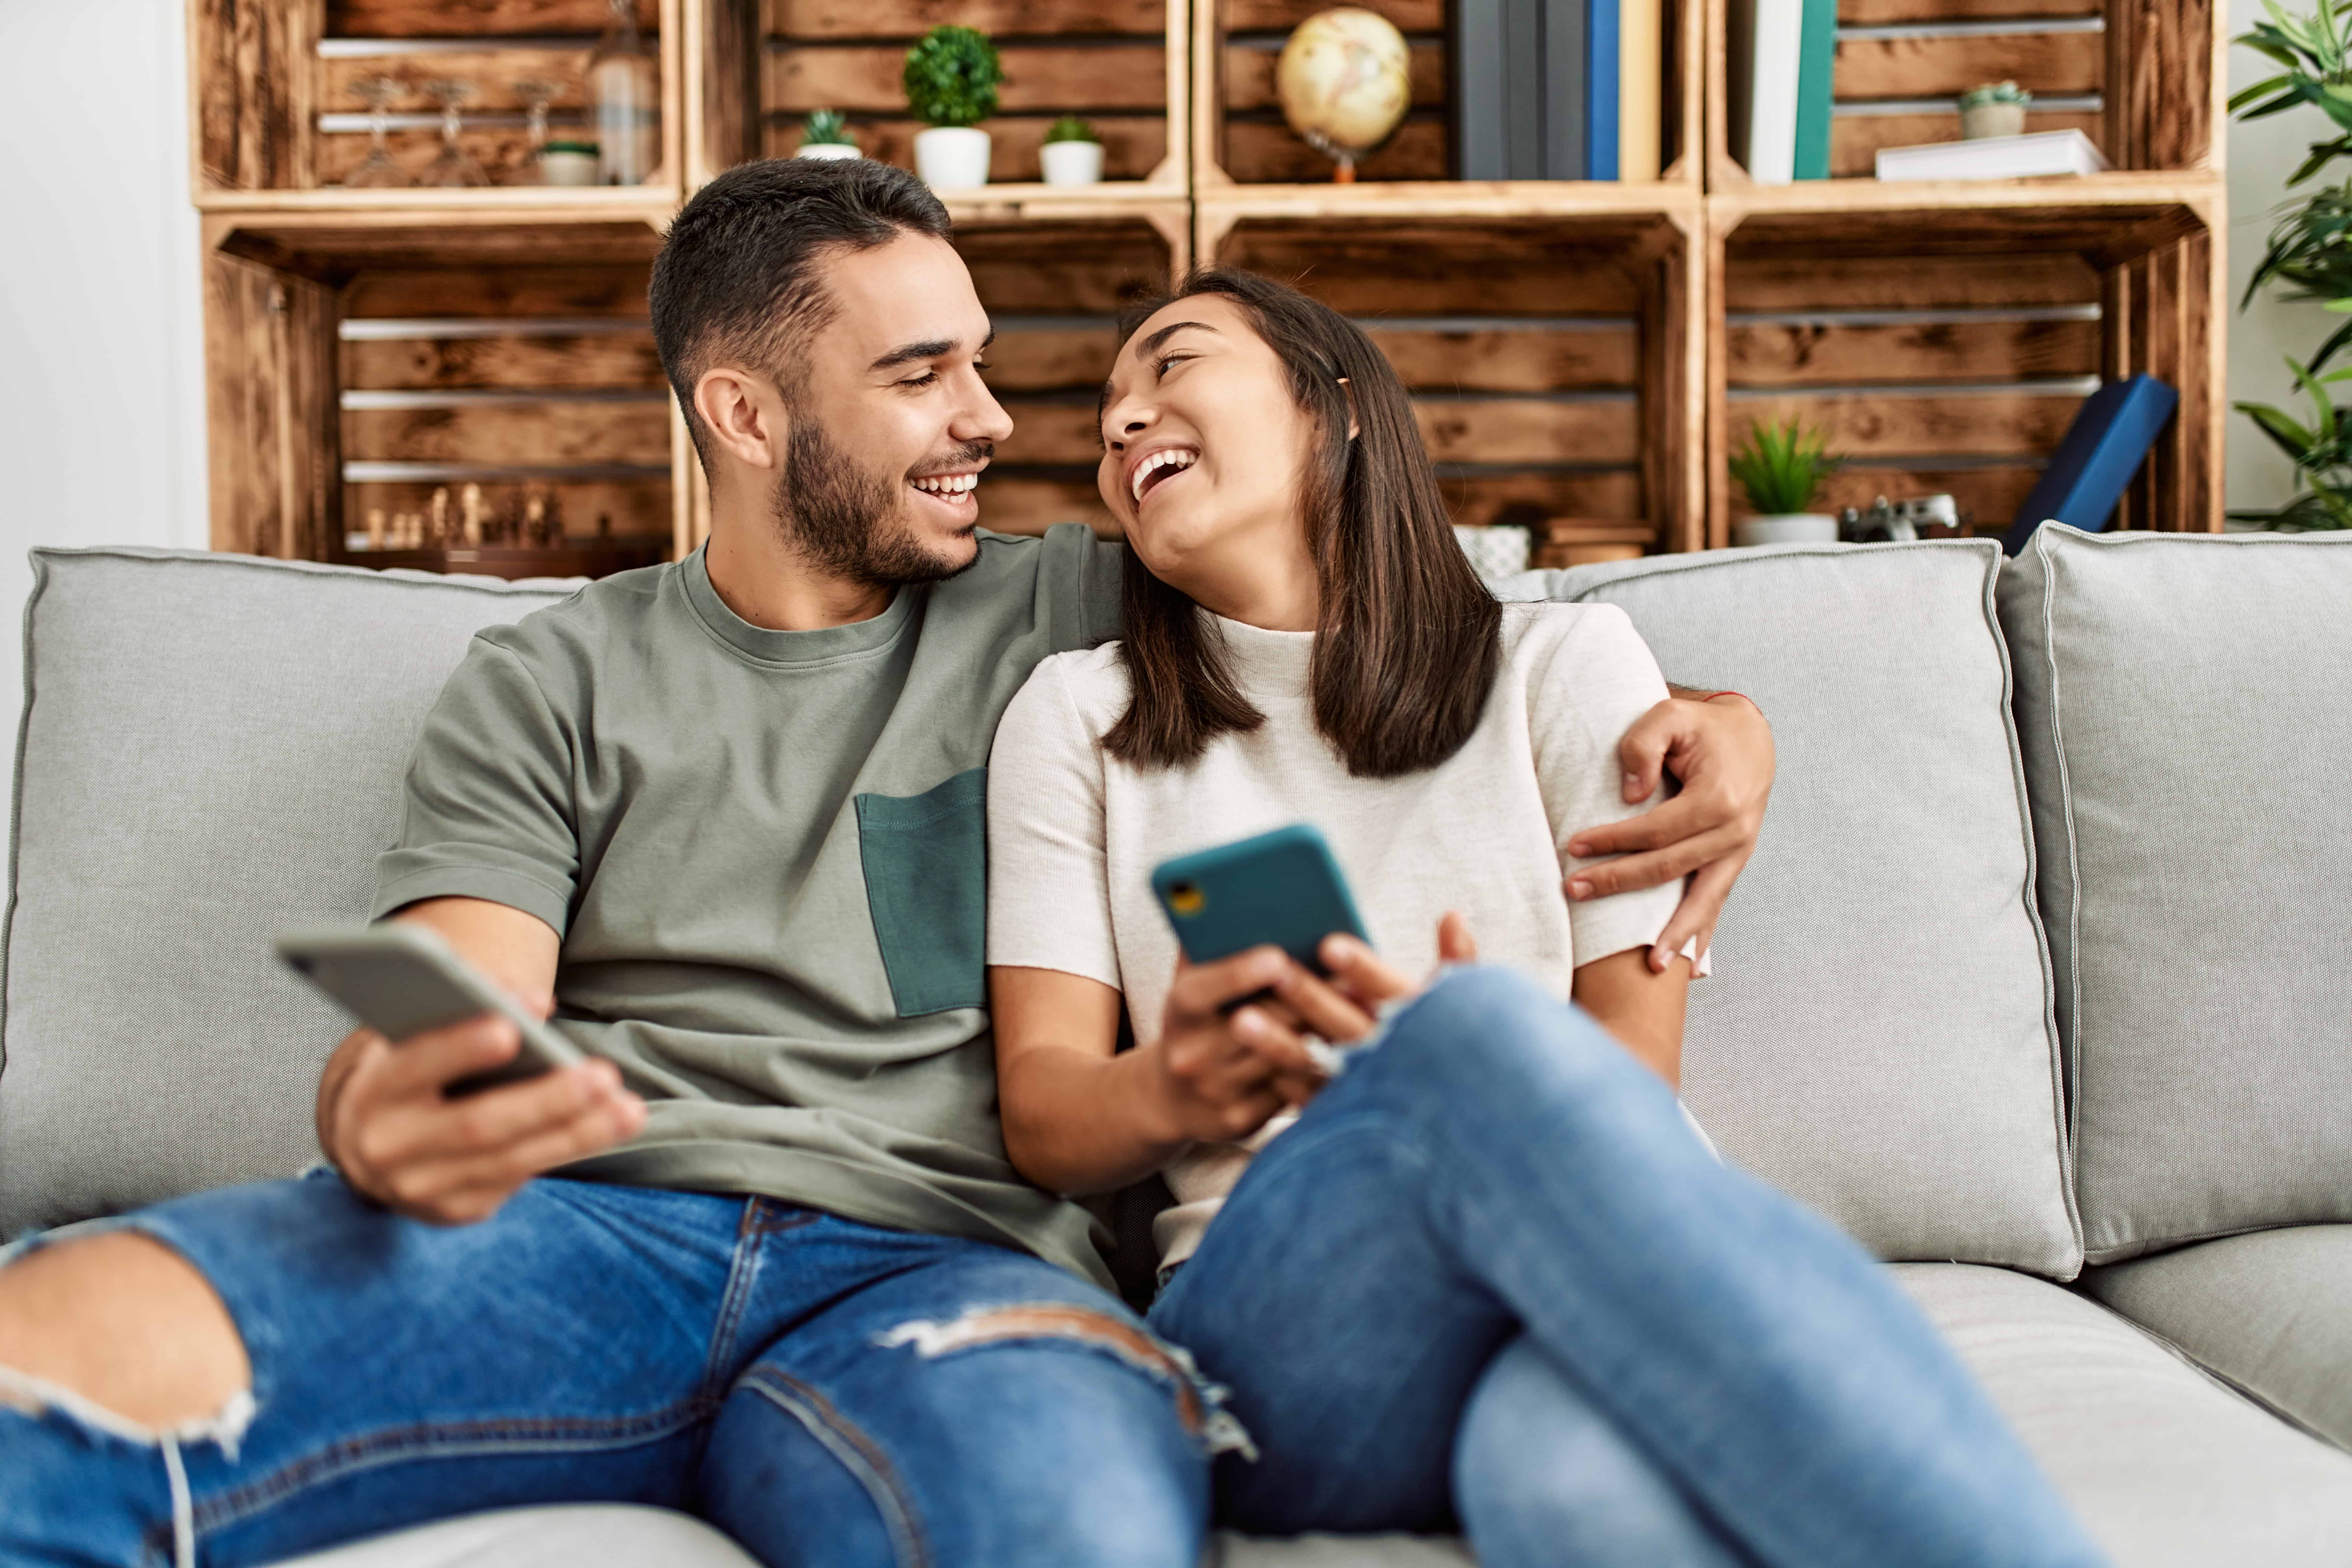 what couples should do to avoid the impacts of social media on relationships 